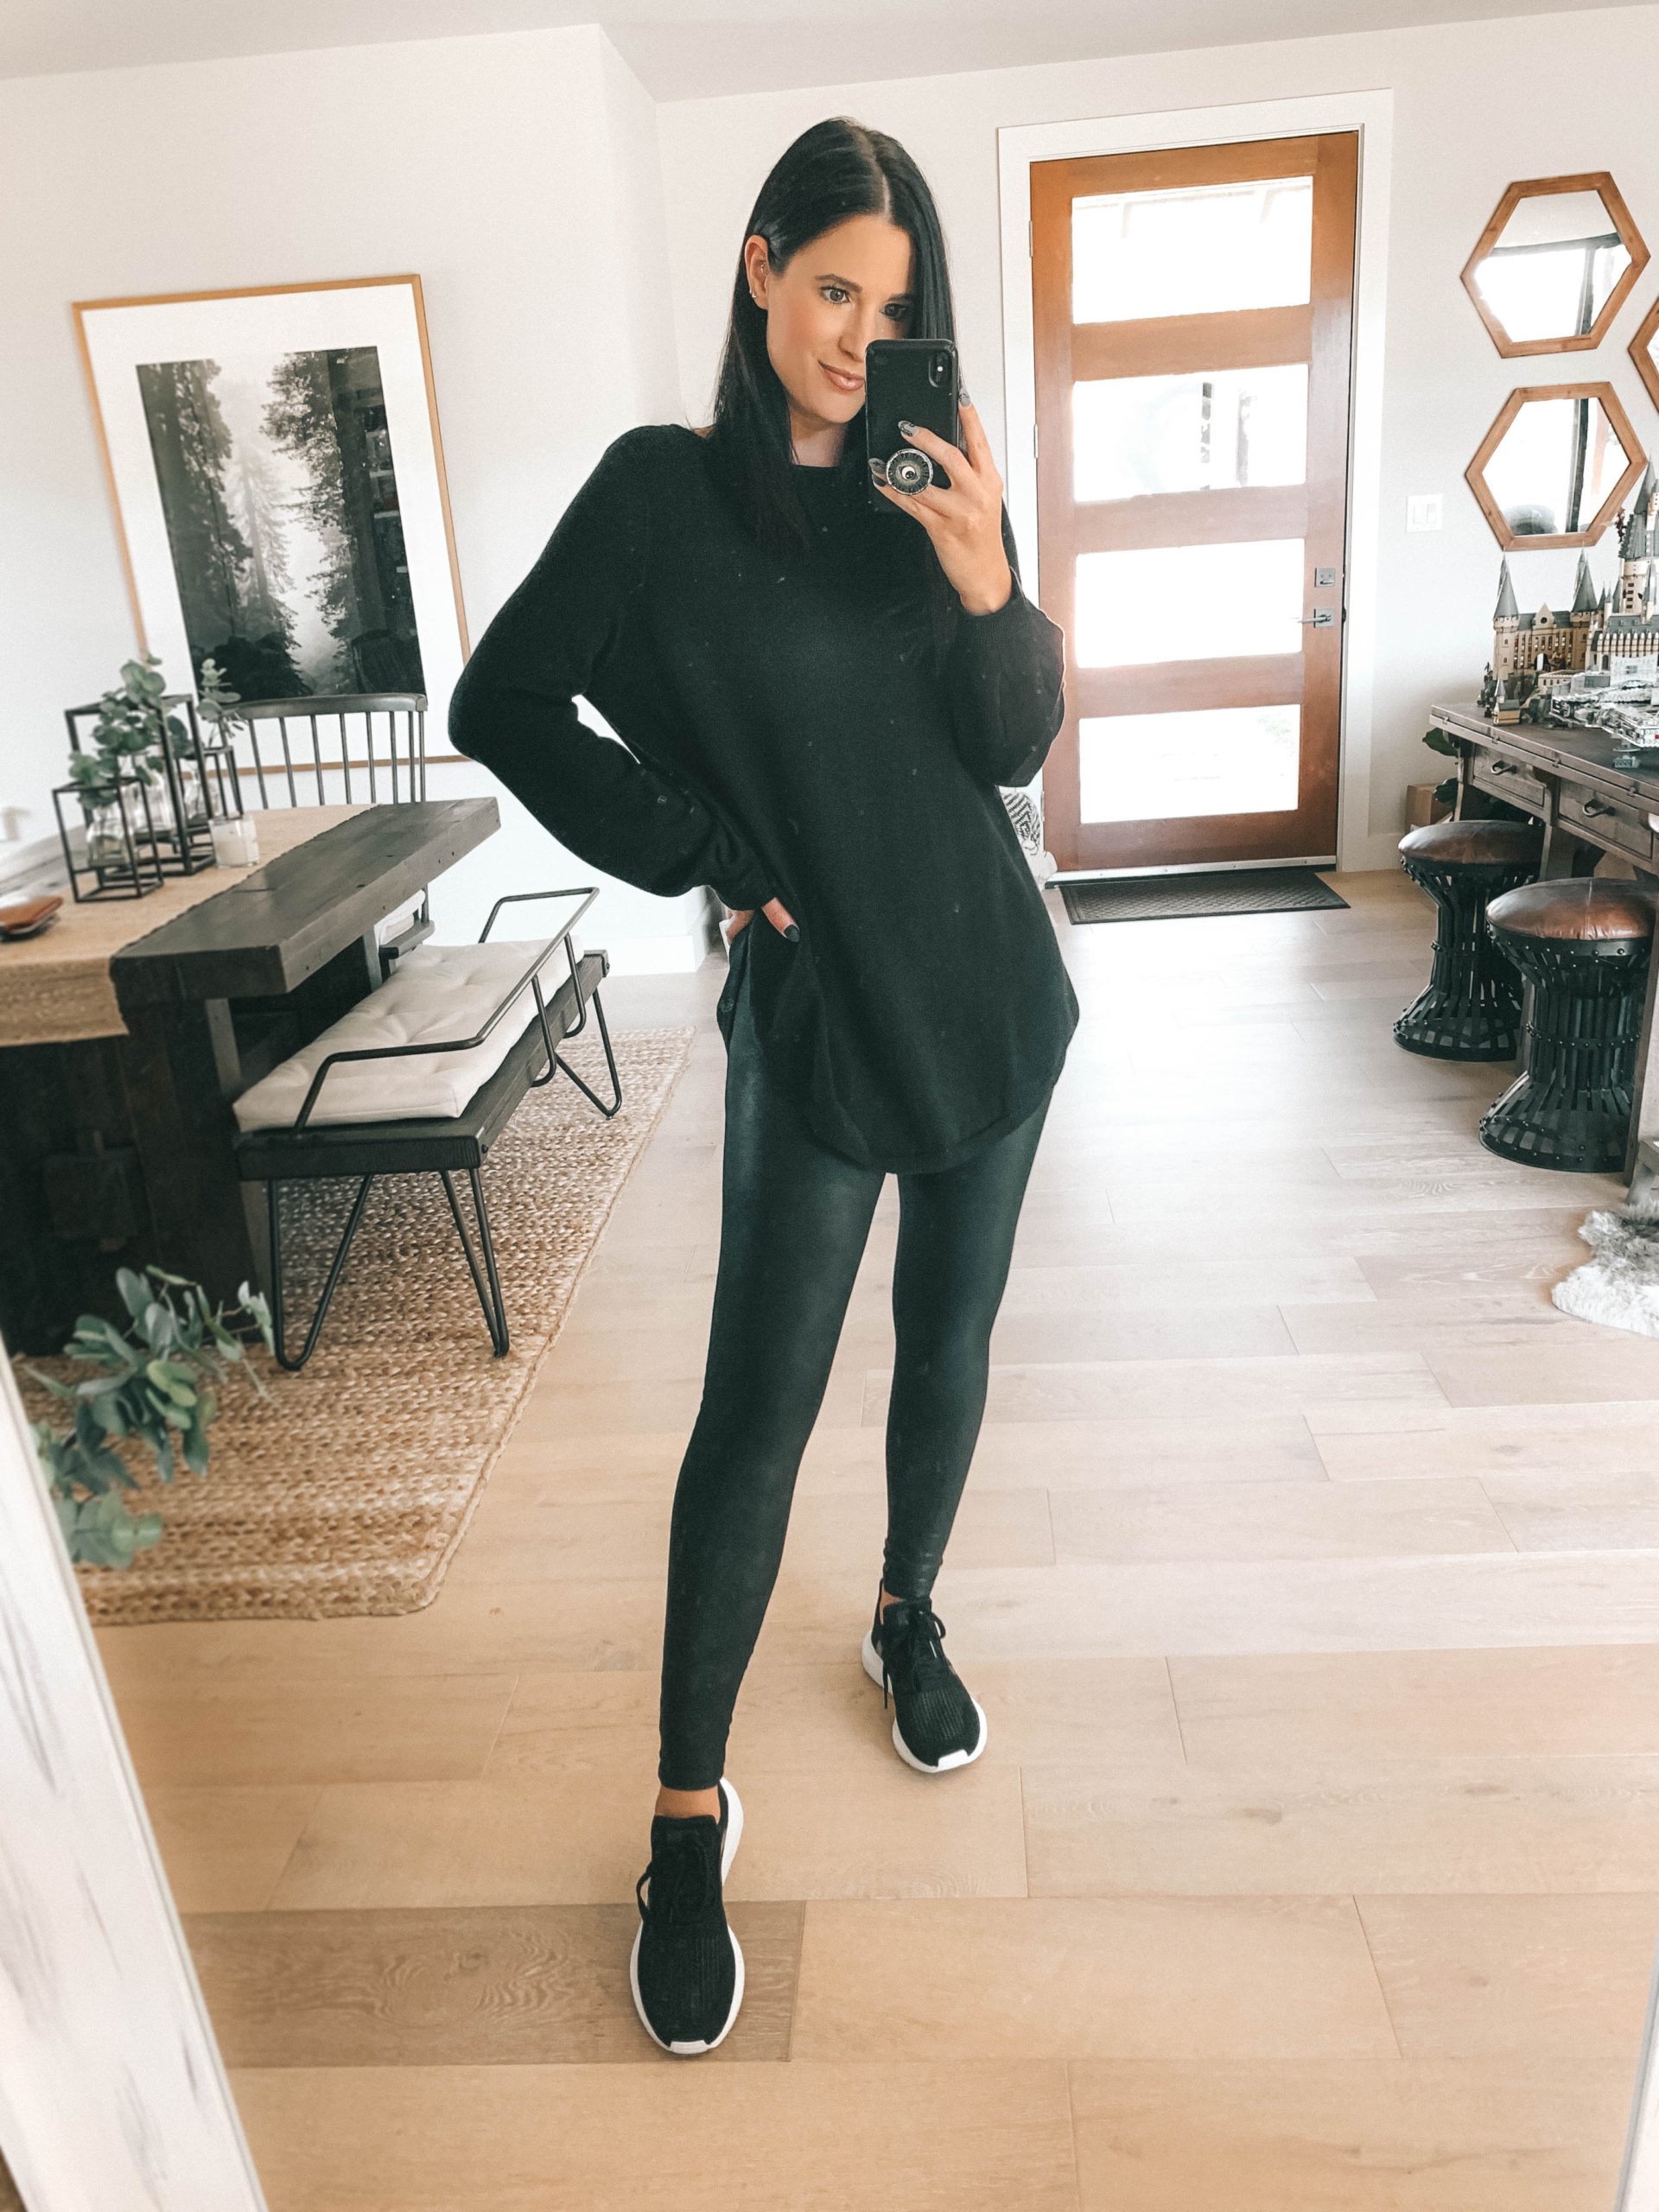 Nordstrom Anniversary Sale by popular Austin fashion blog, Dressed to Kill: image of a woman wearing Nordstrom Faux Leather Leggings SPANX, Nordstrom UltraBoost Running Shoe ADIDAS, and Nordstrom Bishop Sleeve Sweater CASLON.